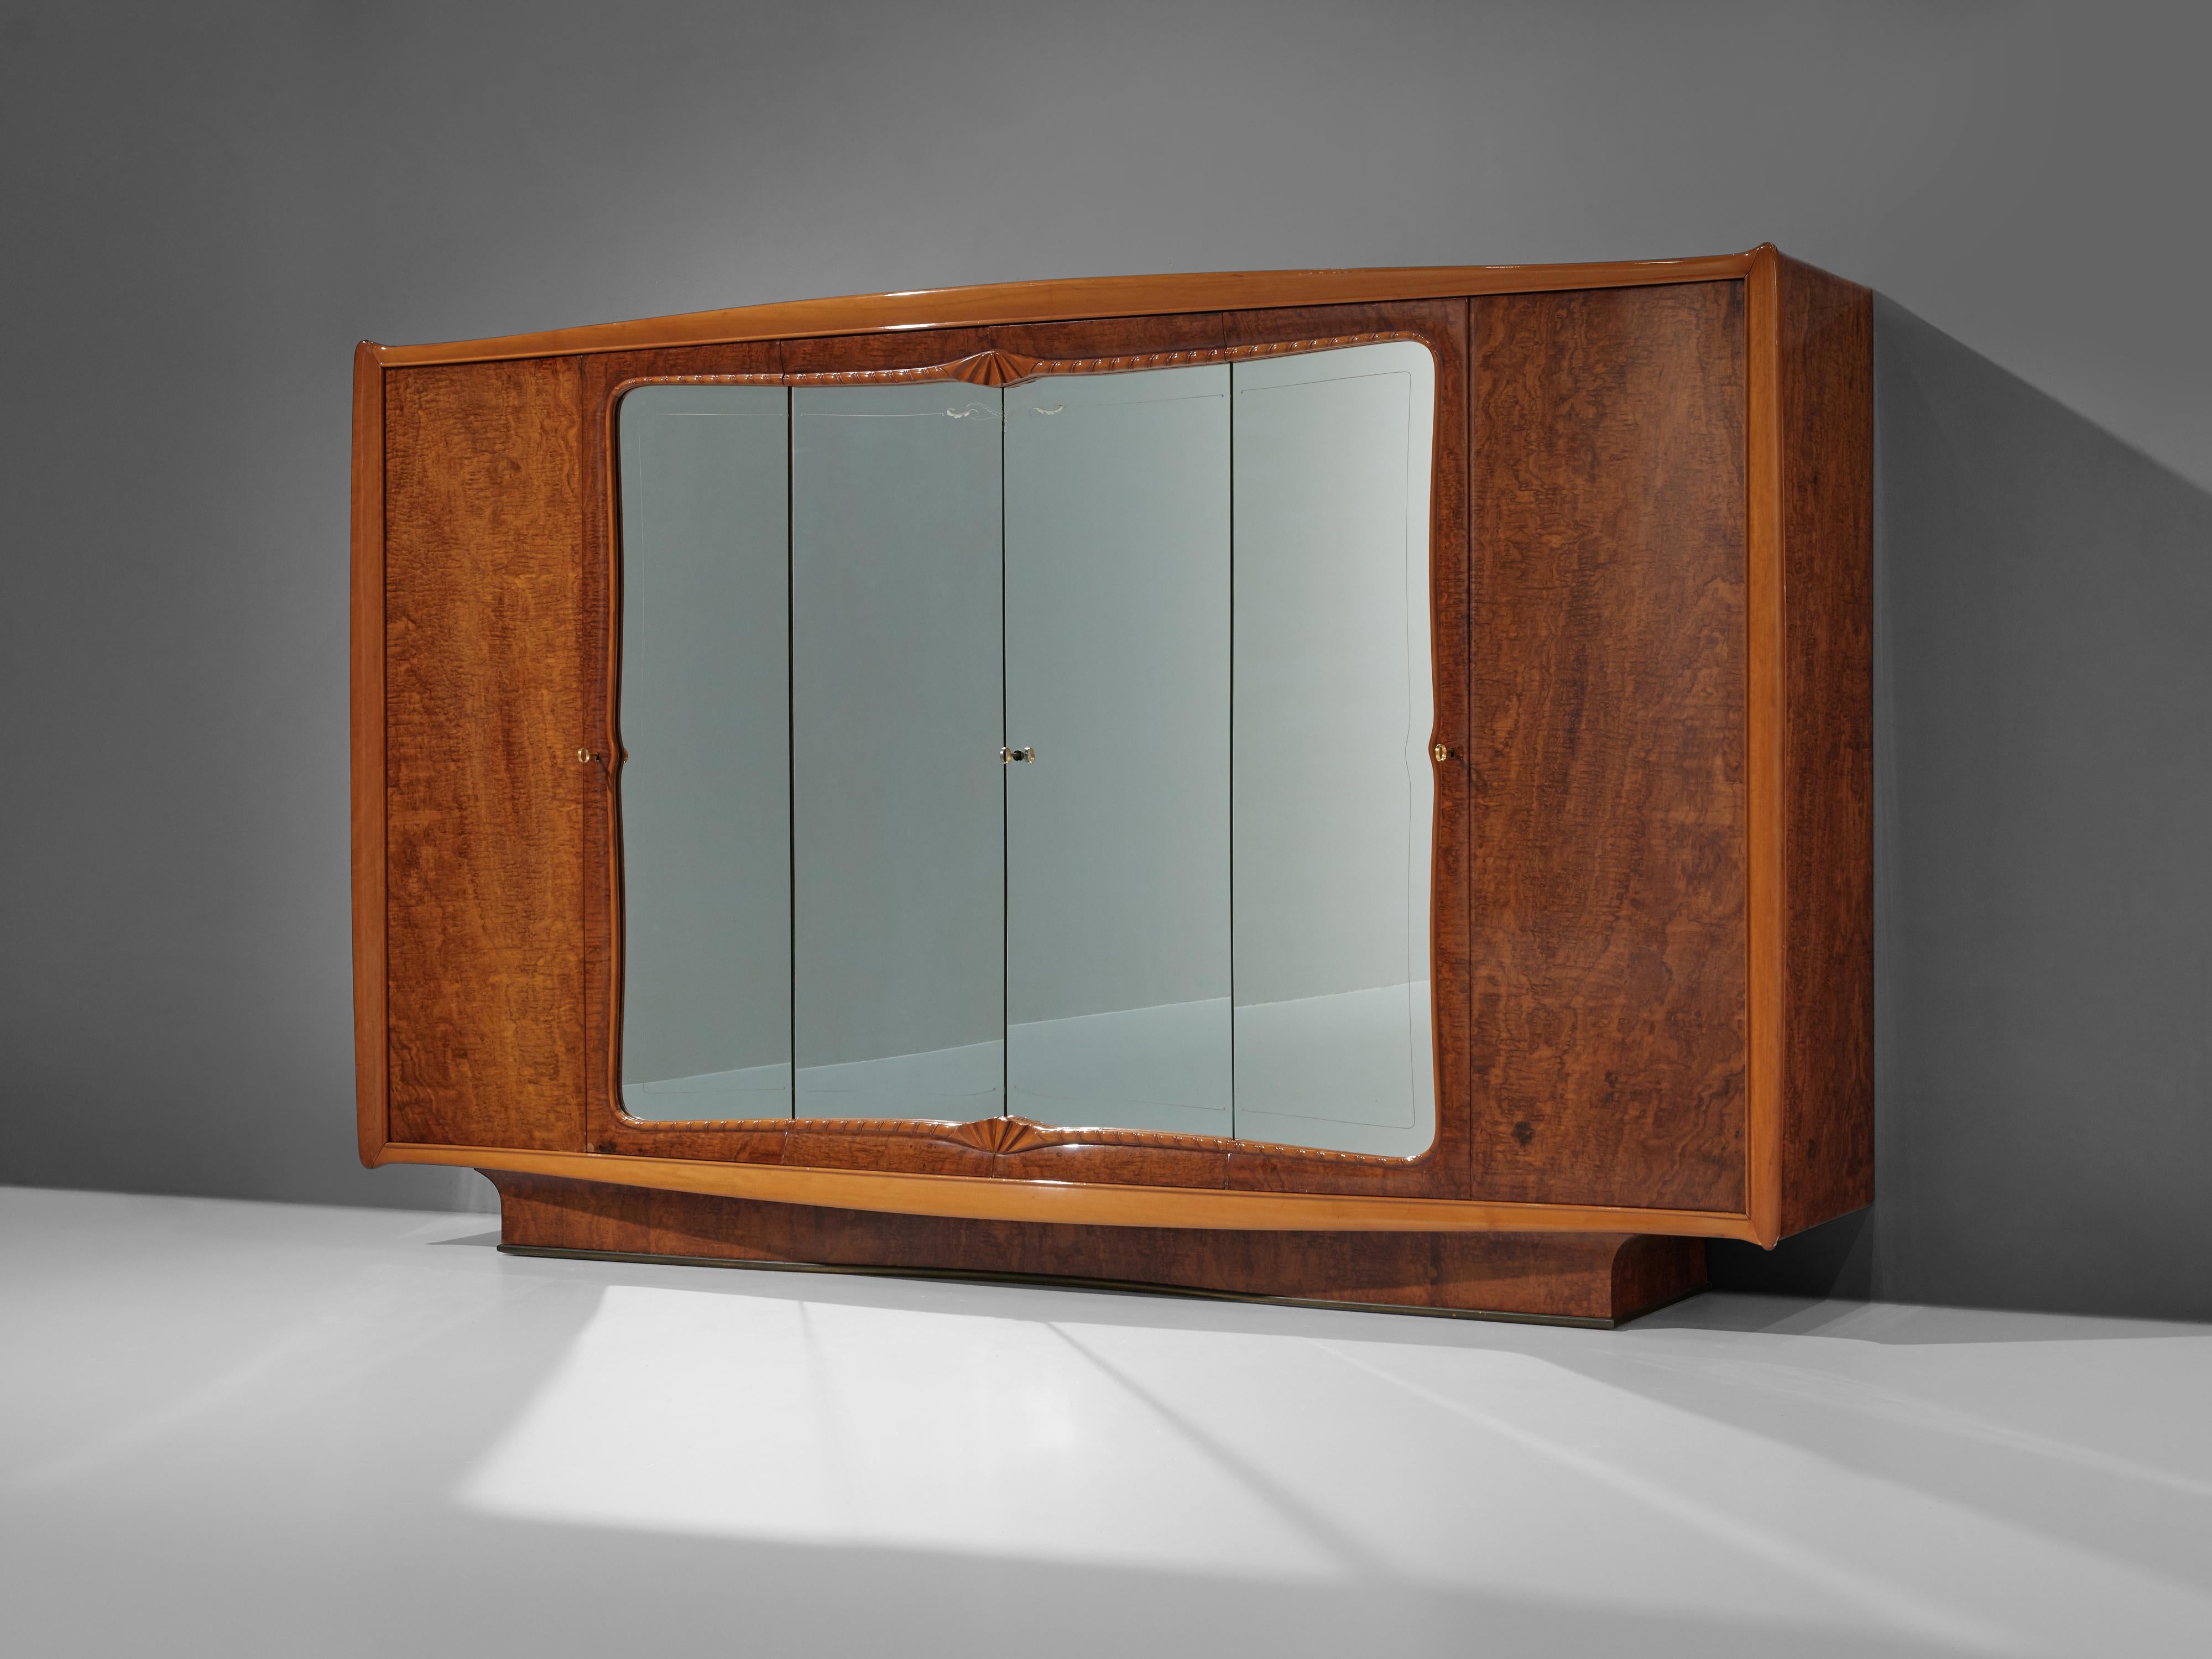 Large Italian wardrobe, walnut burl, glass, brass, wood, Italy, 1950s

With its six doors this wardrobe has an impressive size. Four doors hold a mirrored surface lined with a decorative wooden frame, the two outer doors have a luxurious wooden